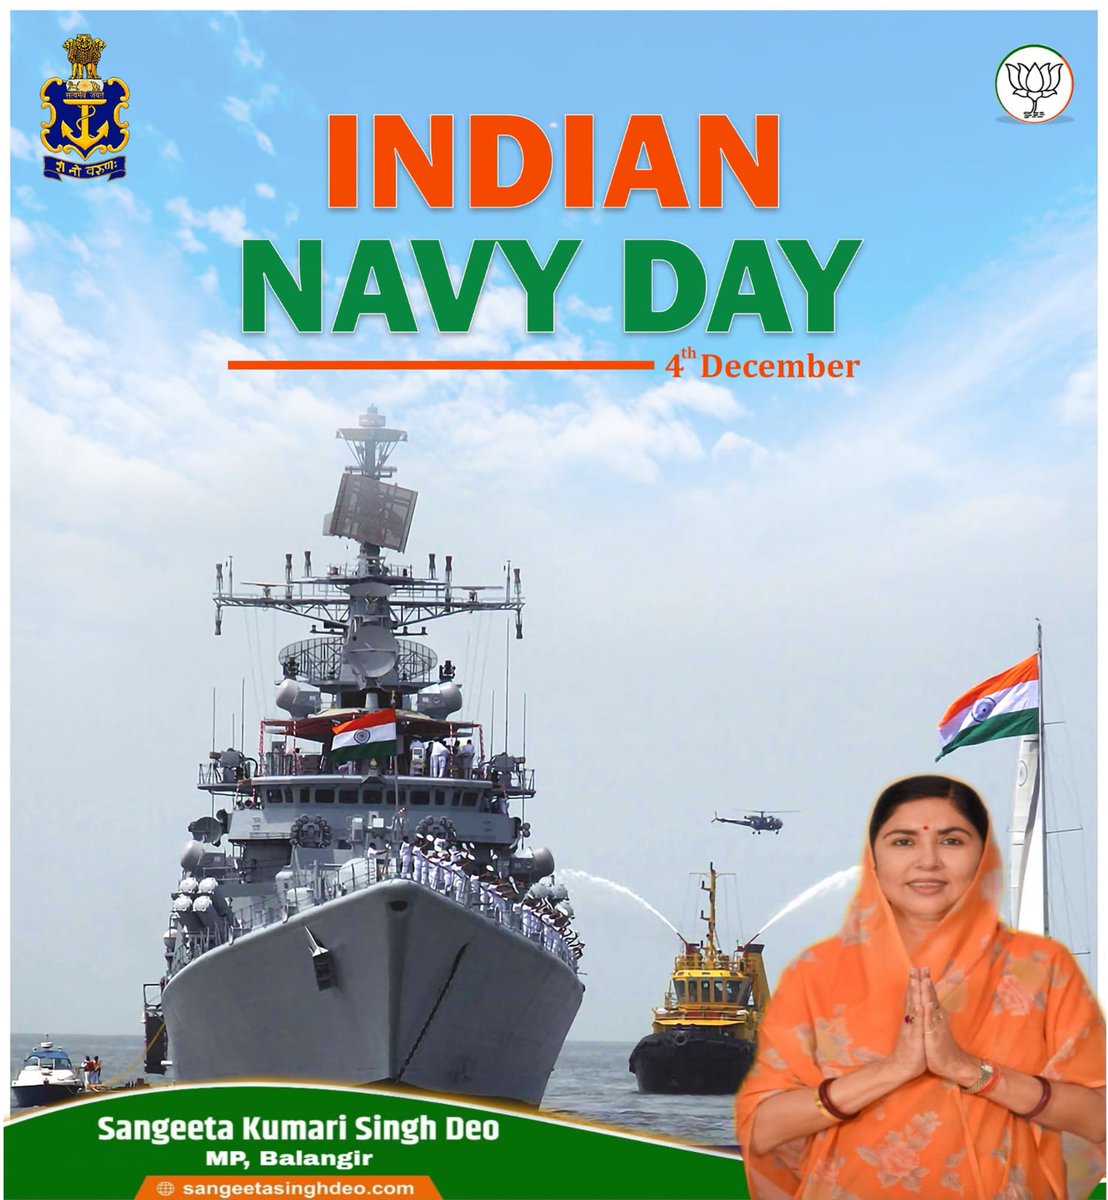 Greetings to all Navy personnel, veterans and their families on #NavyDay . May the glorious legacy of Indian Navy keep inspiring us. #indiannavyday2022